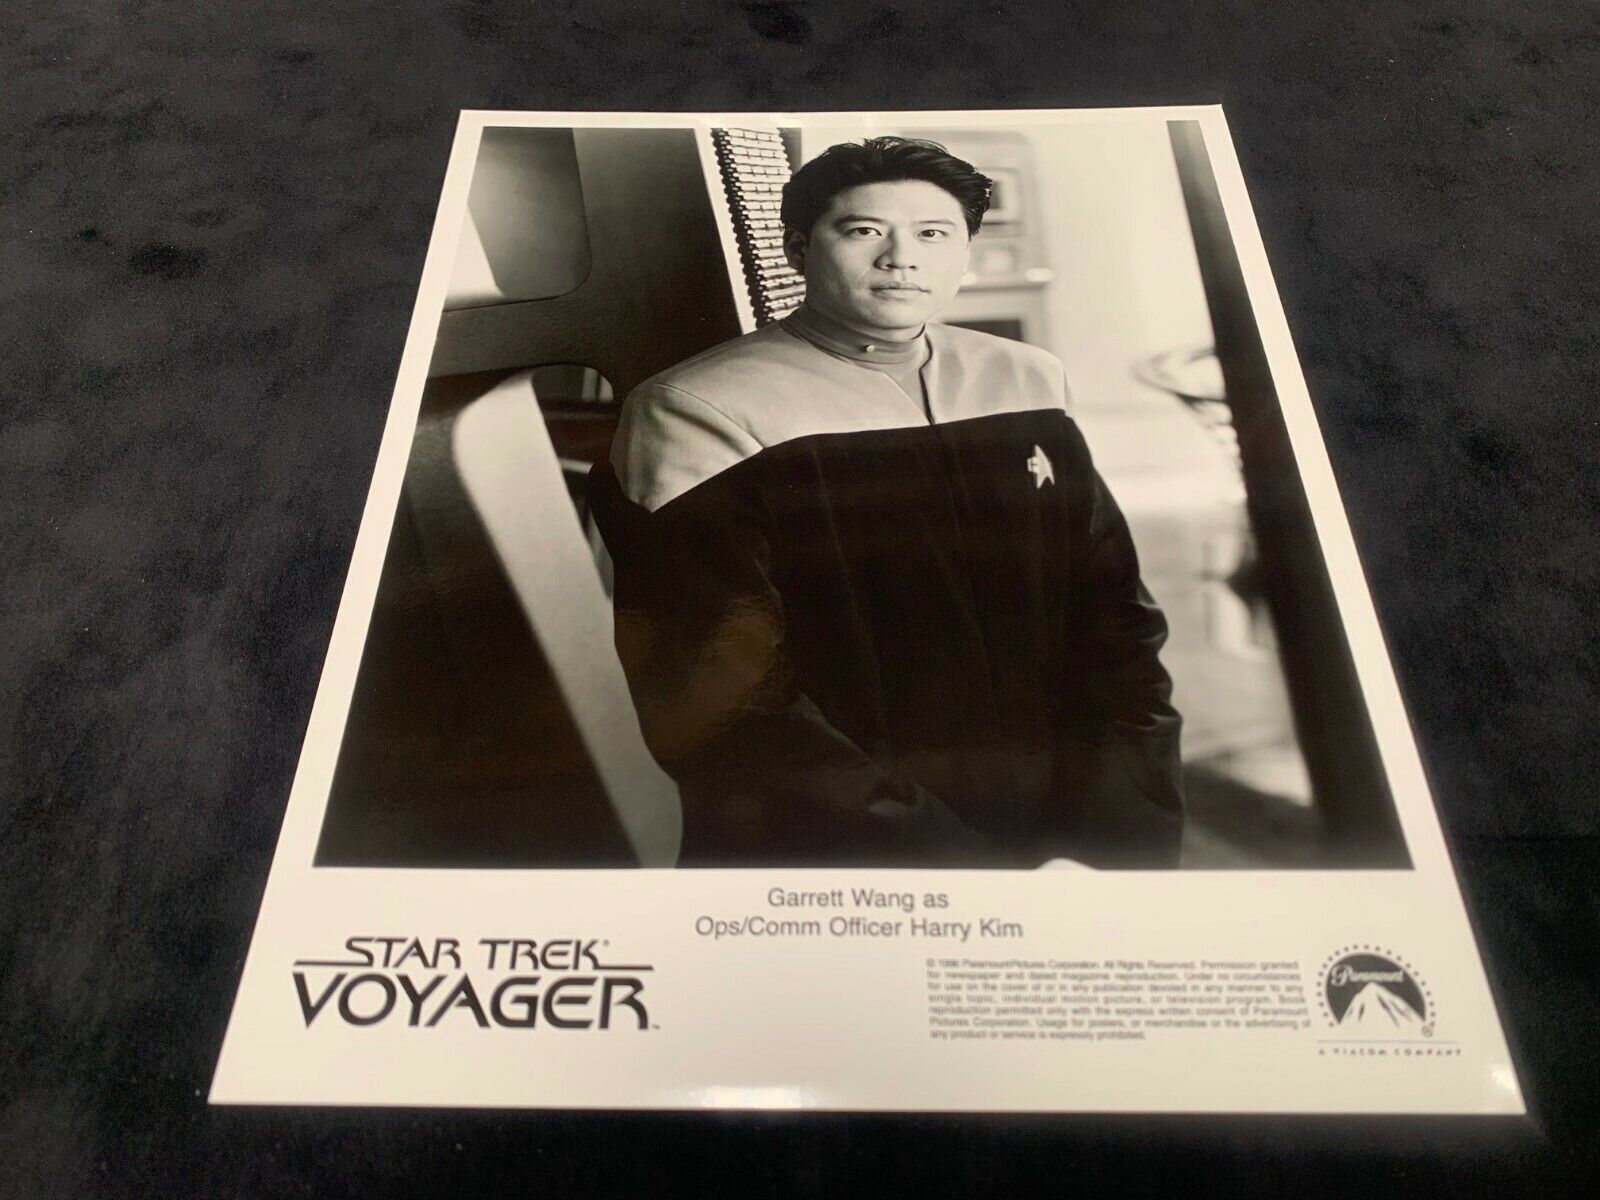 Star Trek Voyager 8x10 B&W Photo of Garret Wang in Excellent Condition